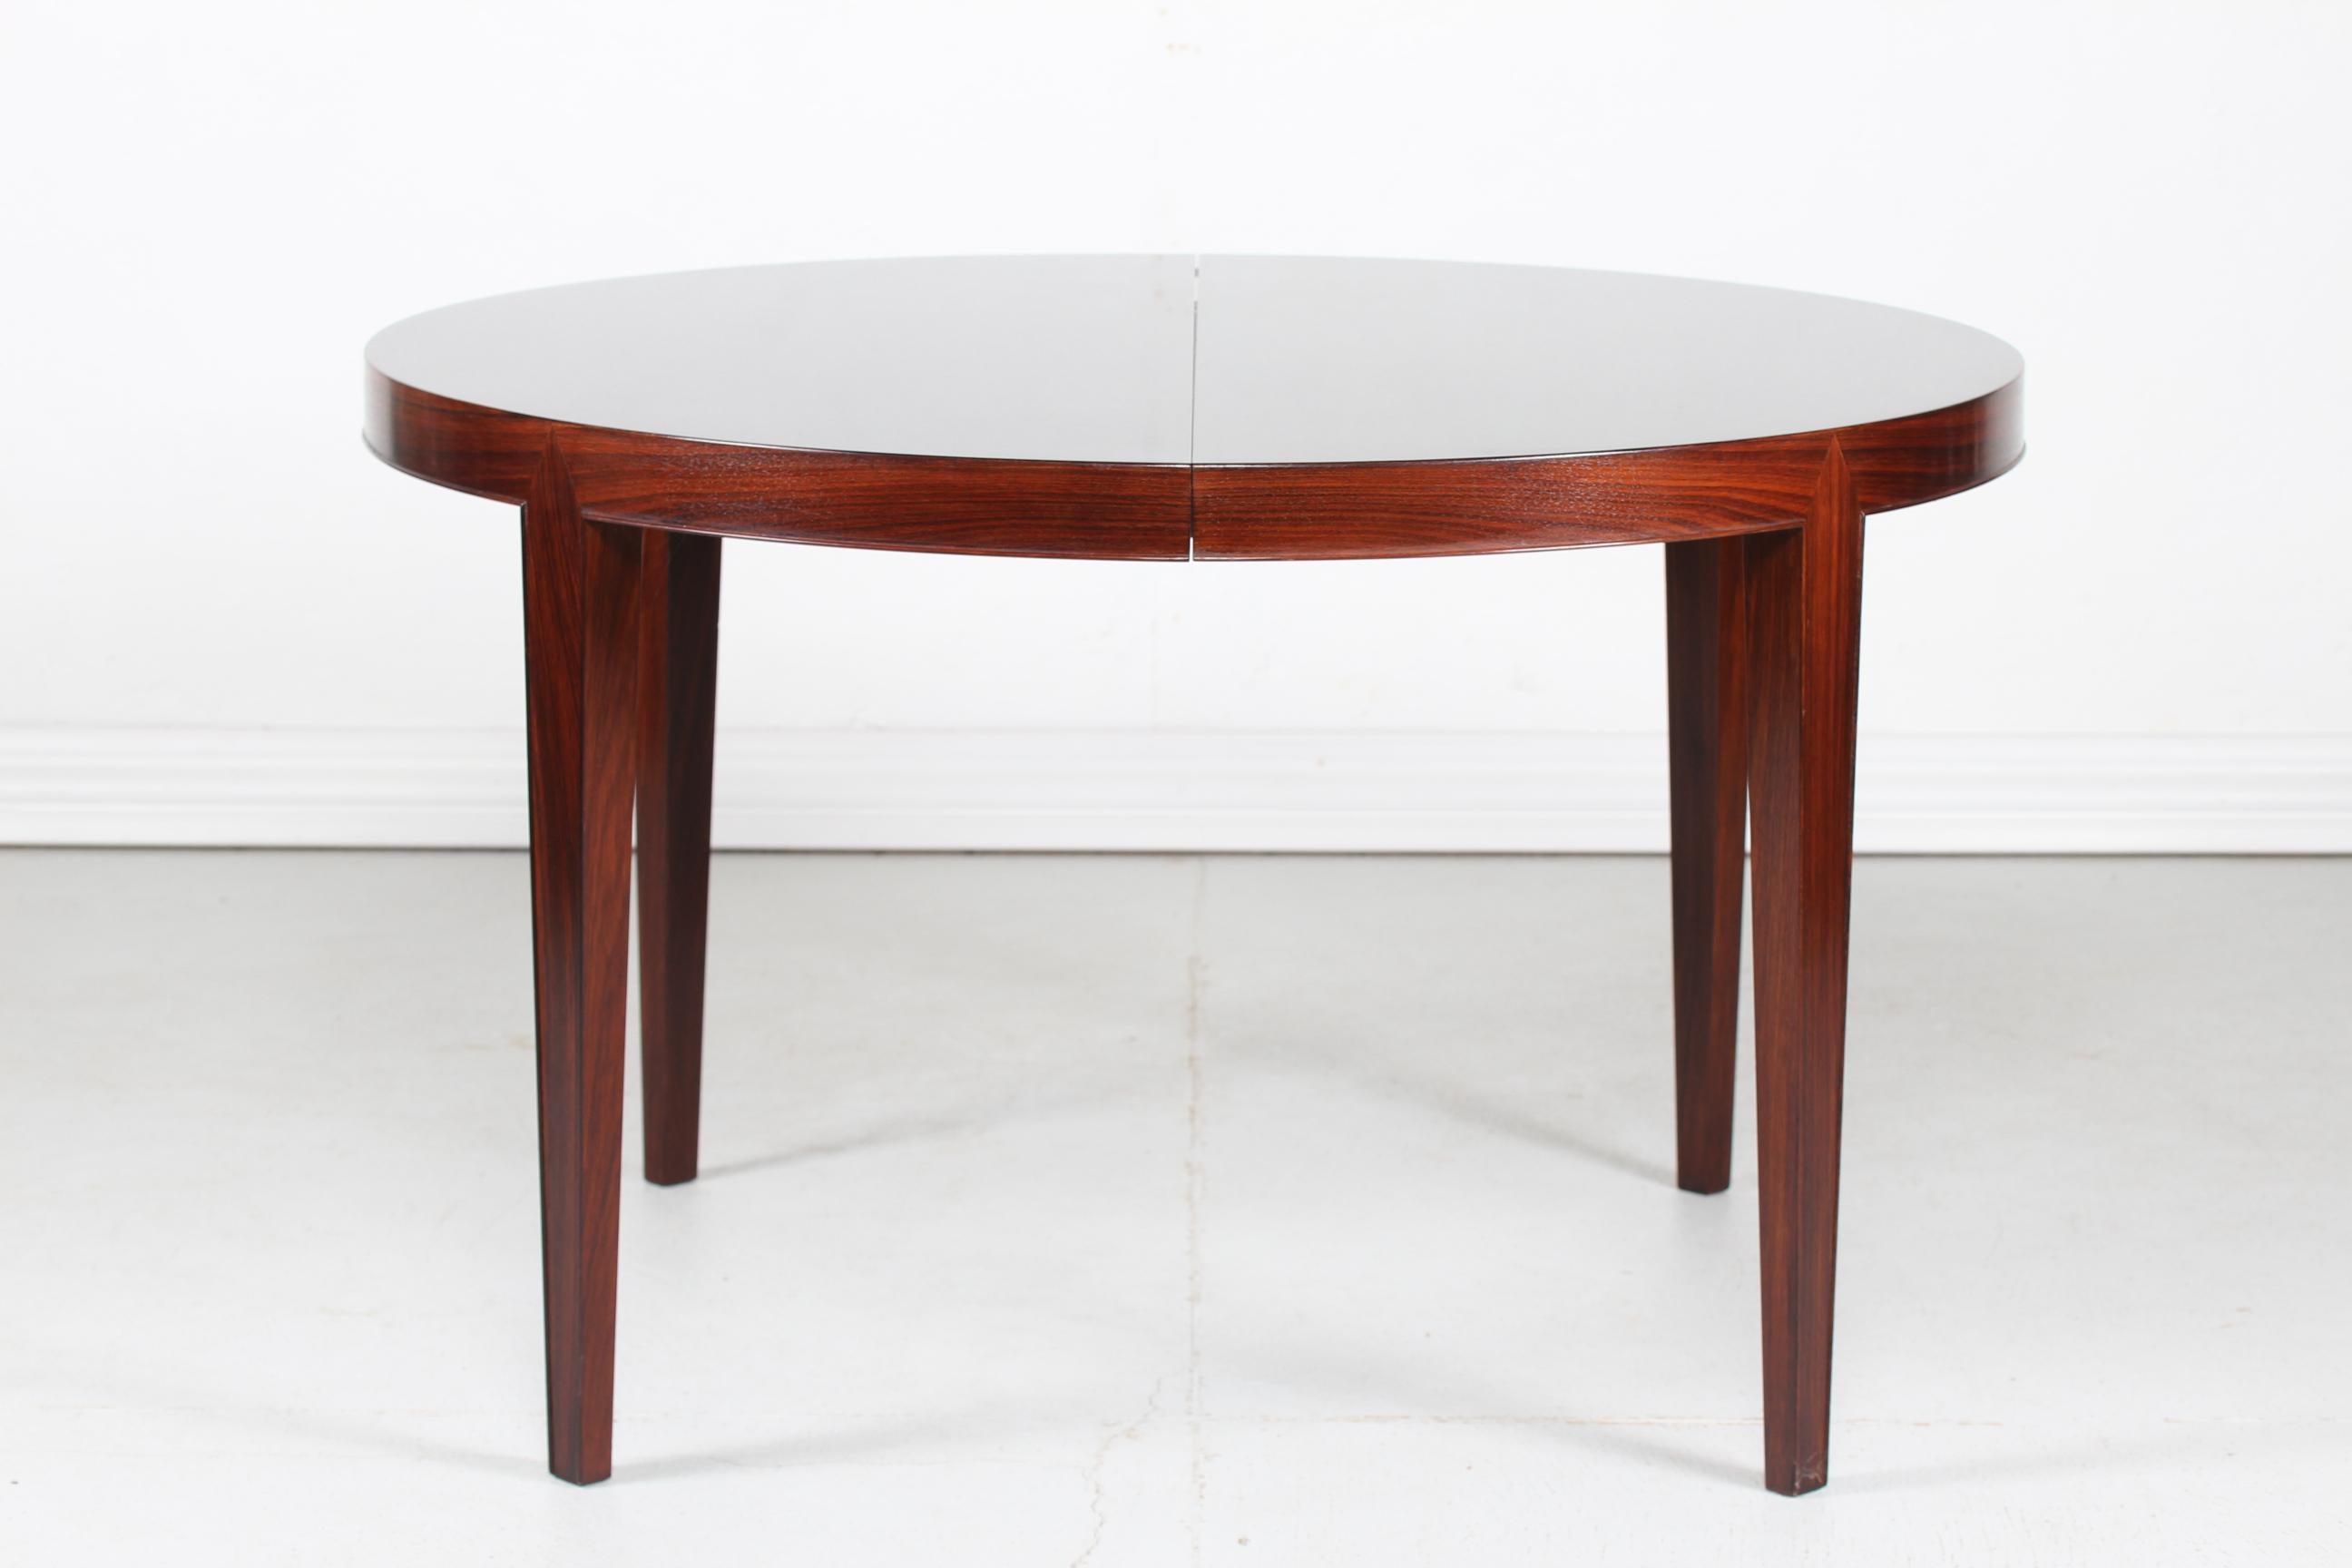 Severin Hansen Jr. for Haslev Møbler in Denmark. 
Round rosewood dining table with 2 extending extra leaves.

Measures: Diameter 117 cm
Max length 217 cm.